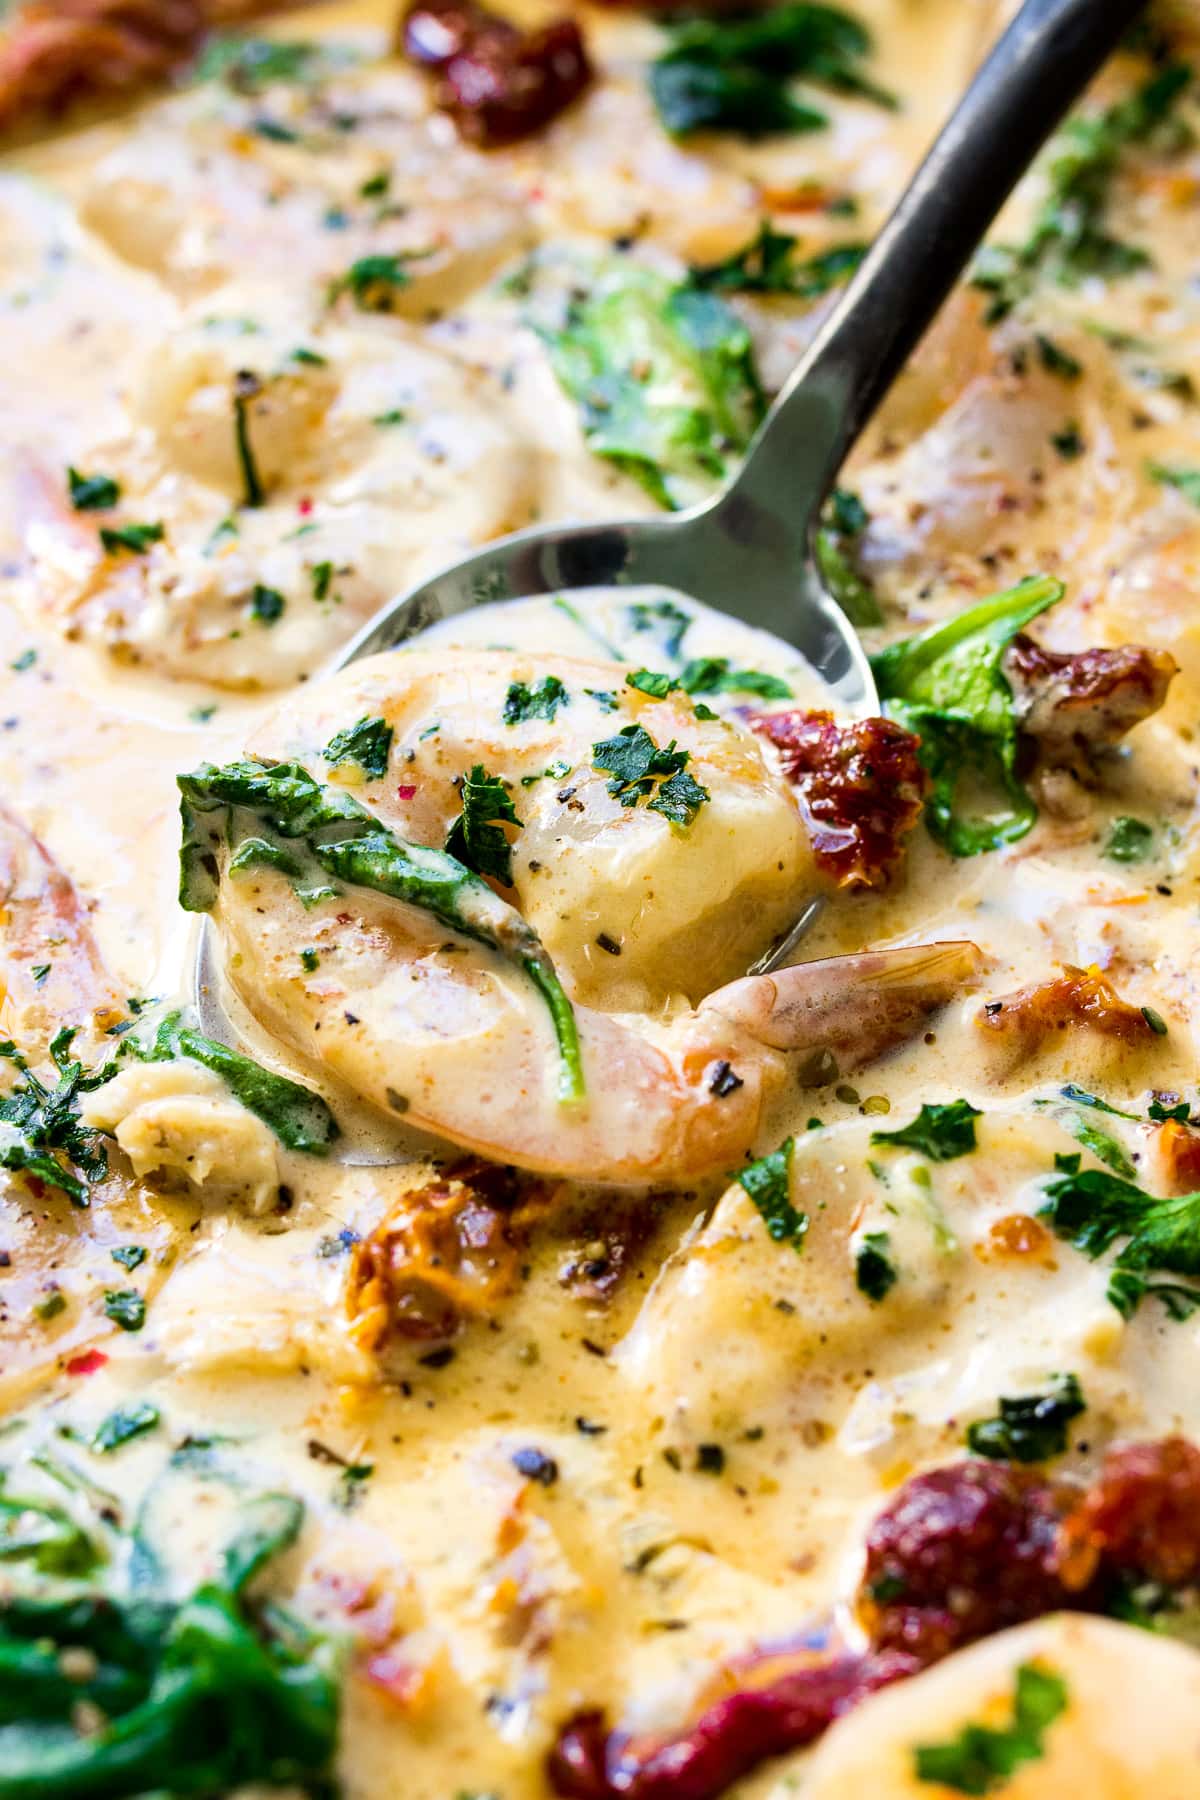 A close up photo of shrimp topped with parsley, spinach and sun-dried tomatoes nestled on a spoon in a creamy sauce.